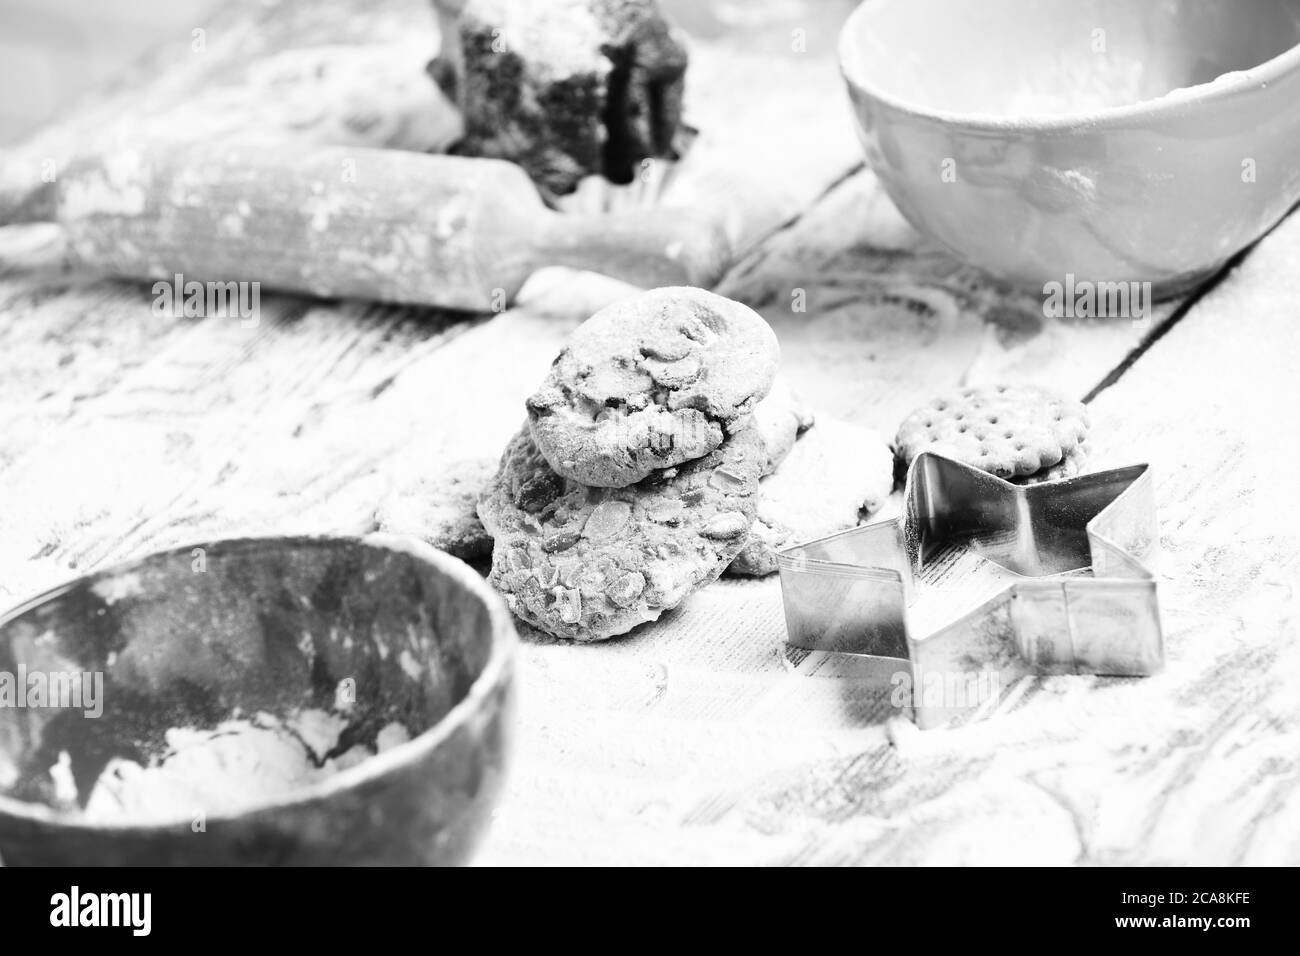 tasty delicious chip chocolate cookies sprinkled with powdered sugar near red turquoise bowls, cutter and rolling pin on wooden table with lot of flour, selective focus Stock Photo